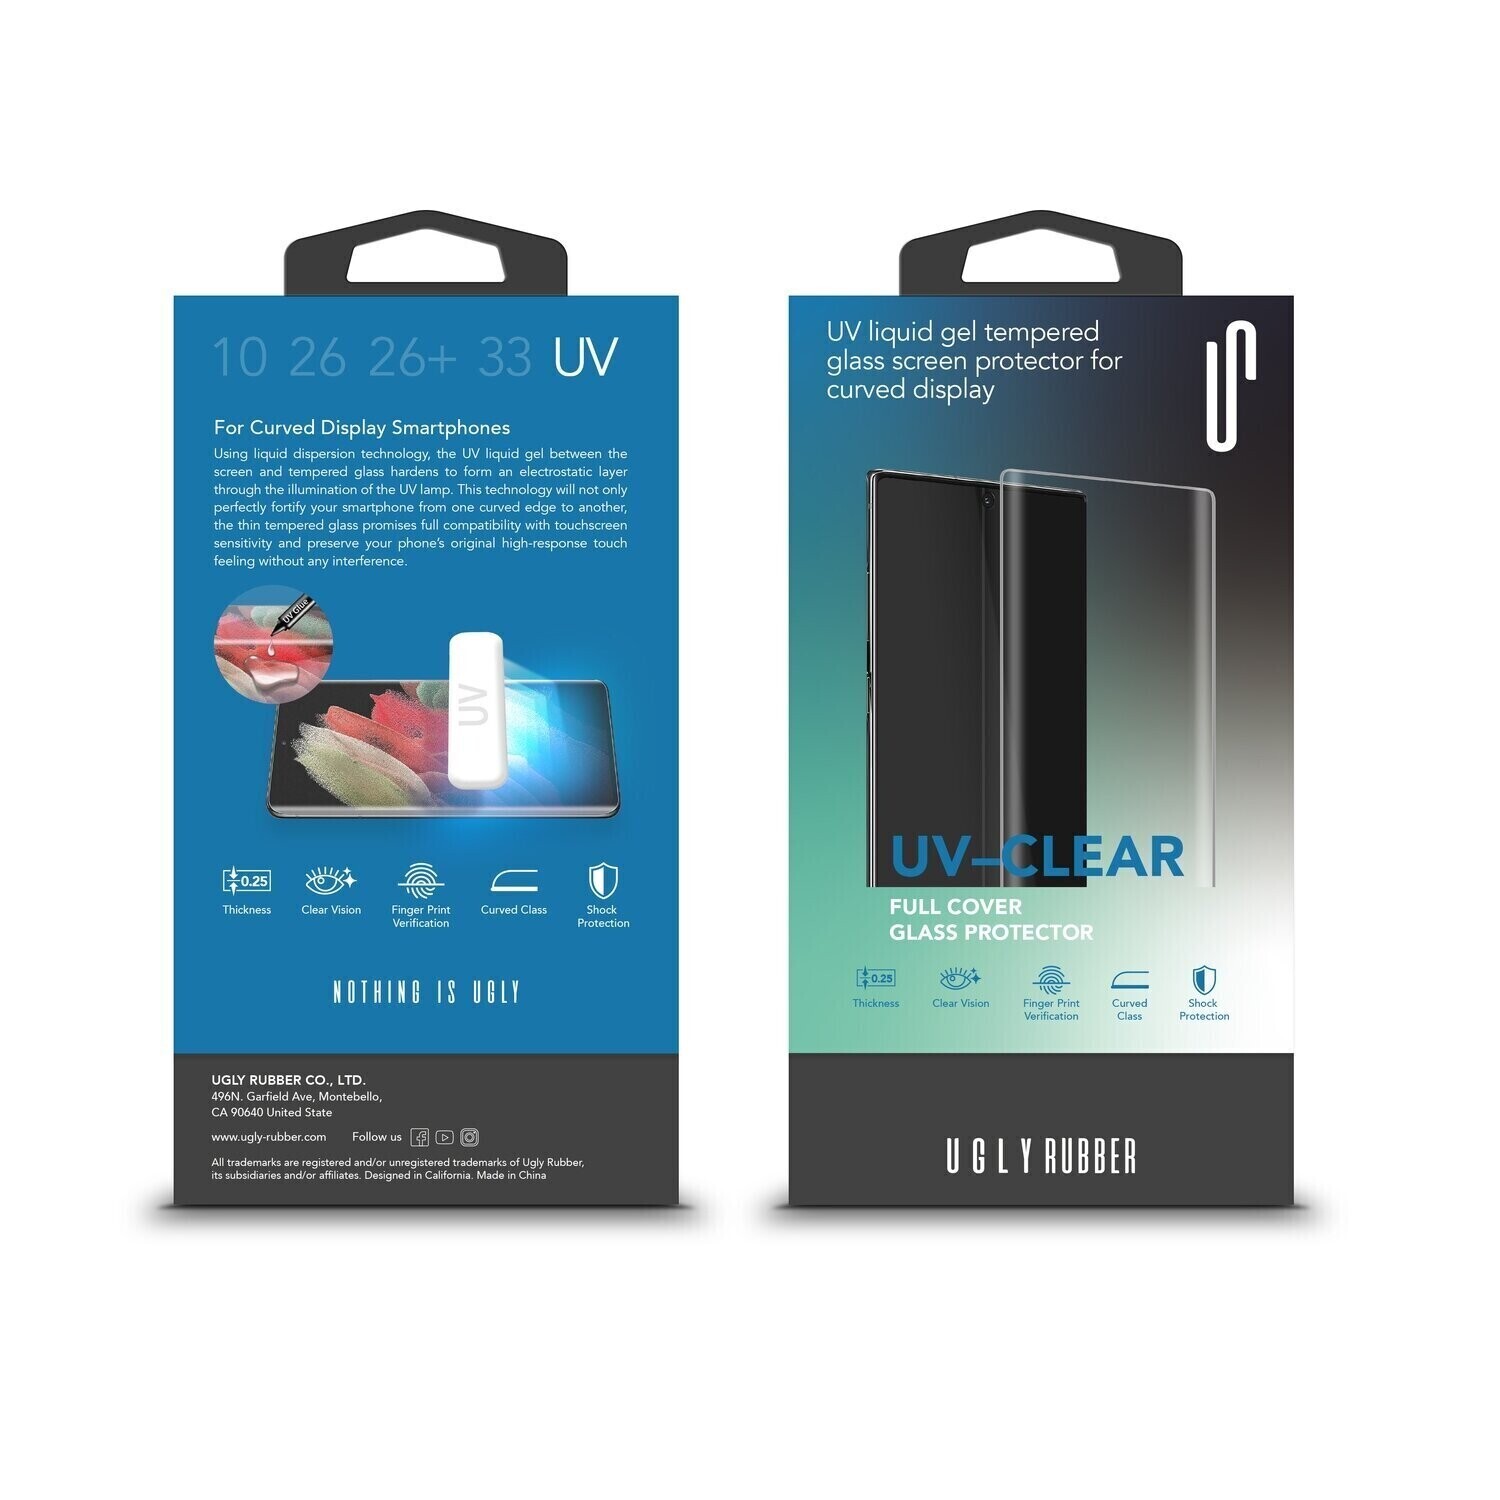 Ugly Rubber Samsung Galaxy Note 10 UV Liquid Gel Tempered Glass, Clear